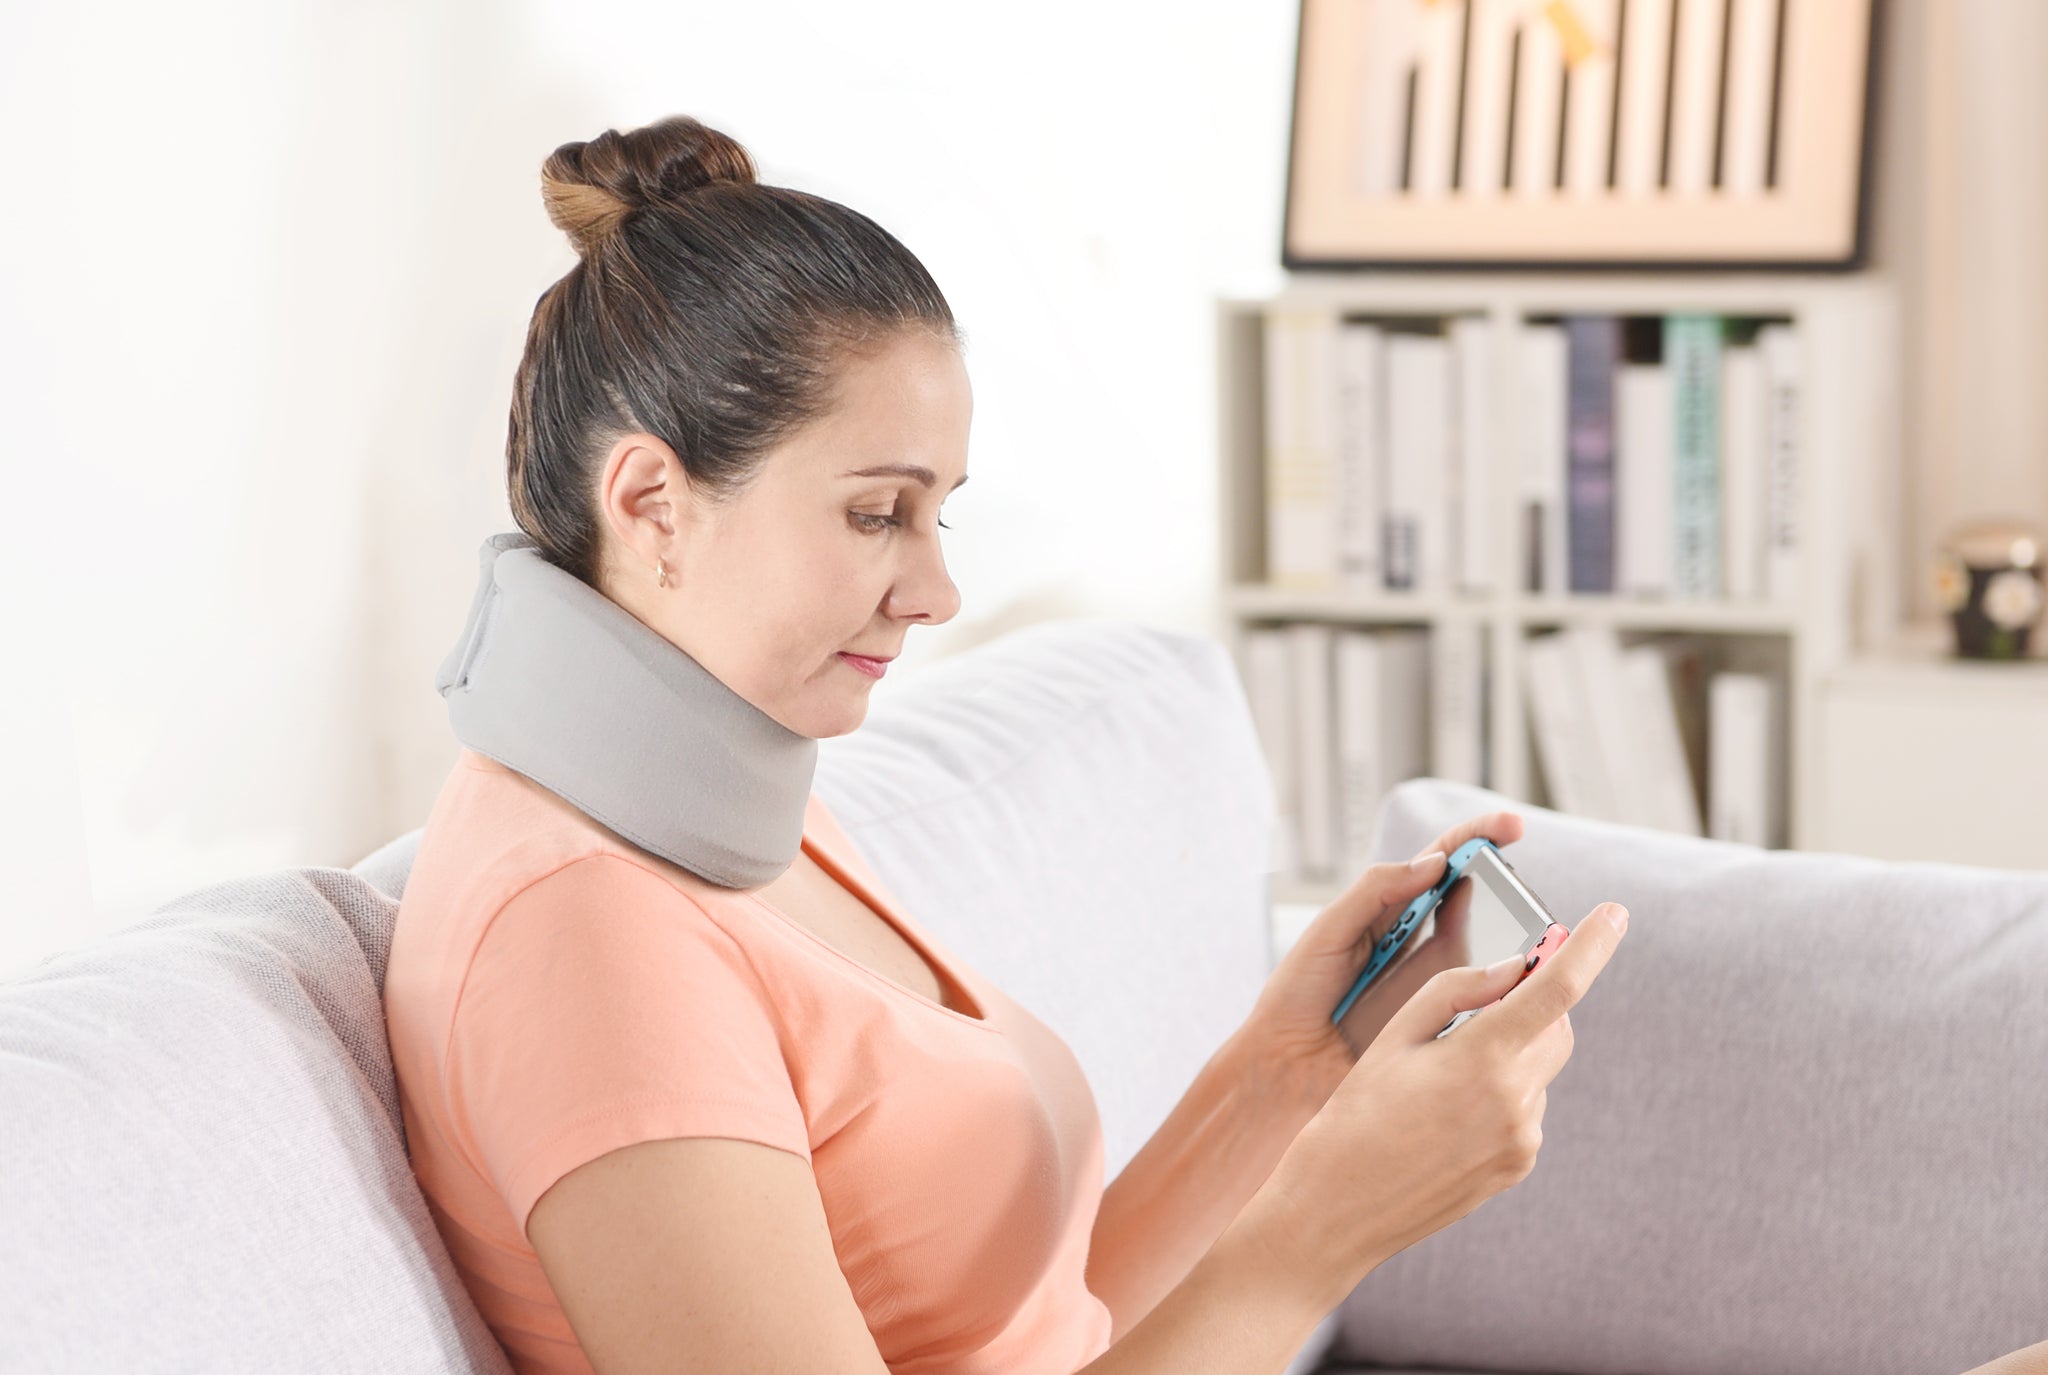 What does a neck brace do?